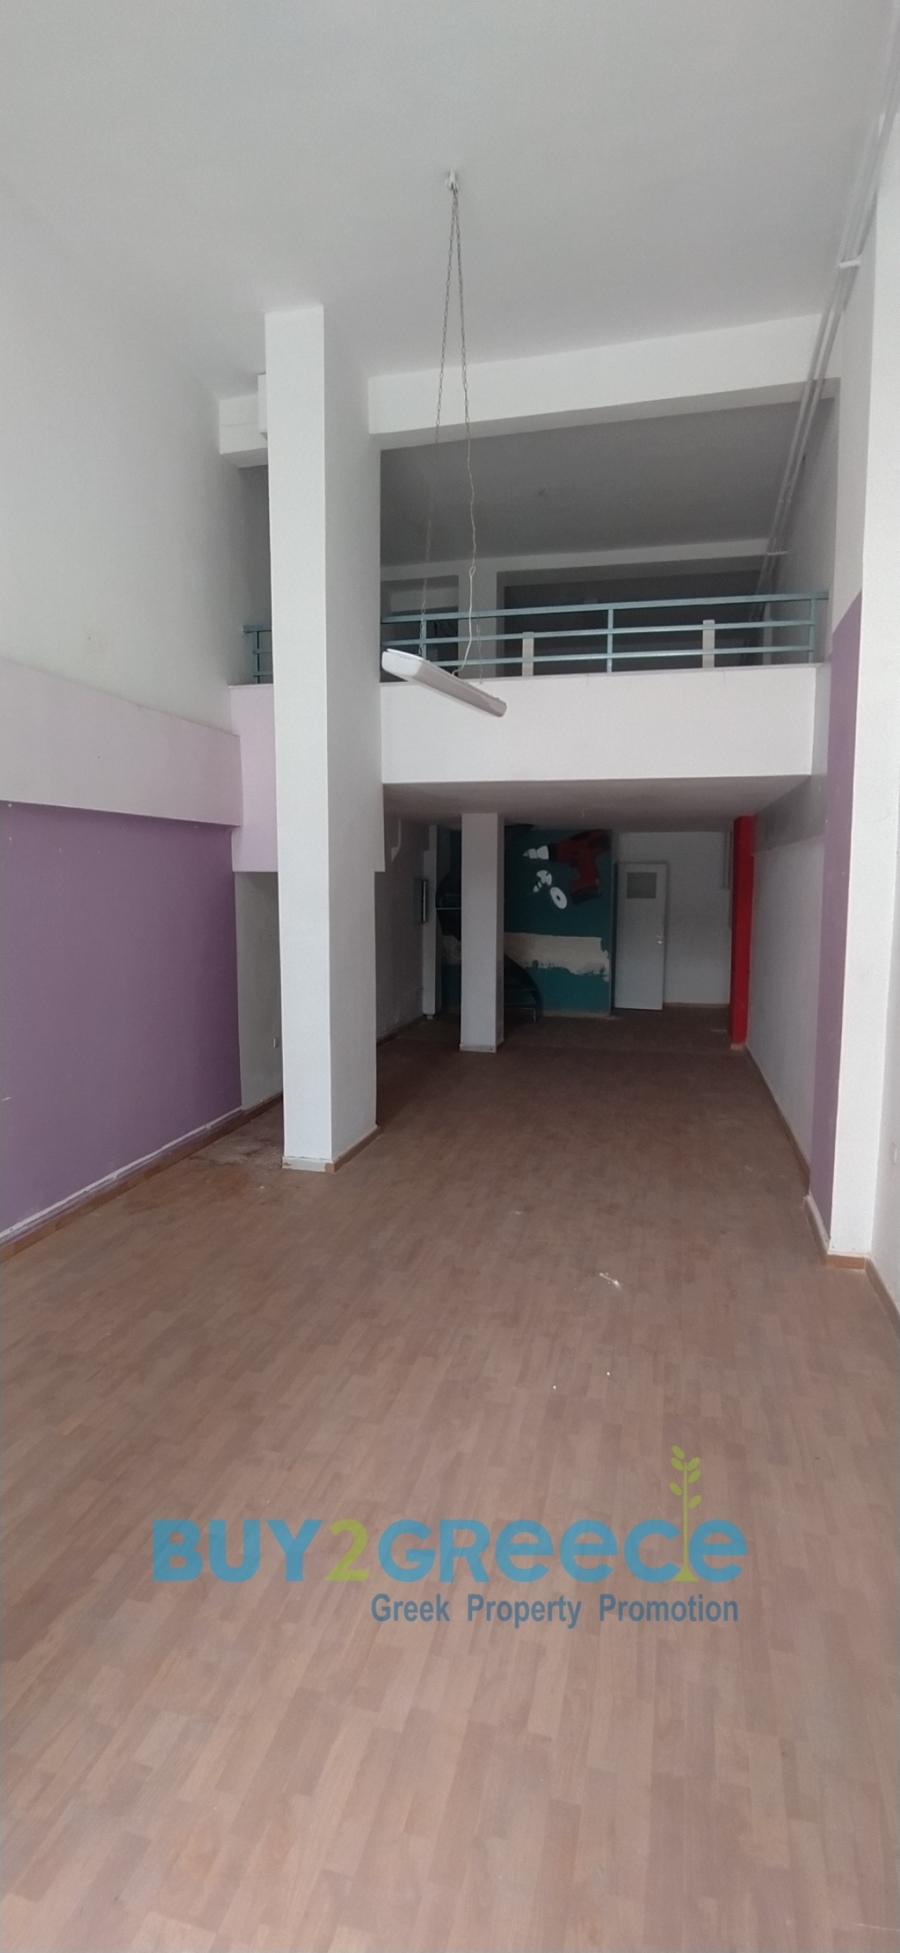 (For Rent) Commercial Retail Shop || Athens Center/Zografos - 60 Sq.m, 400€ ||| ID :1602253-1